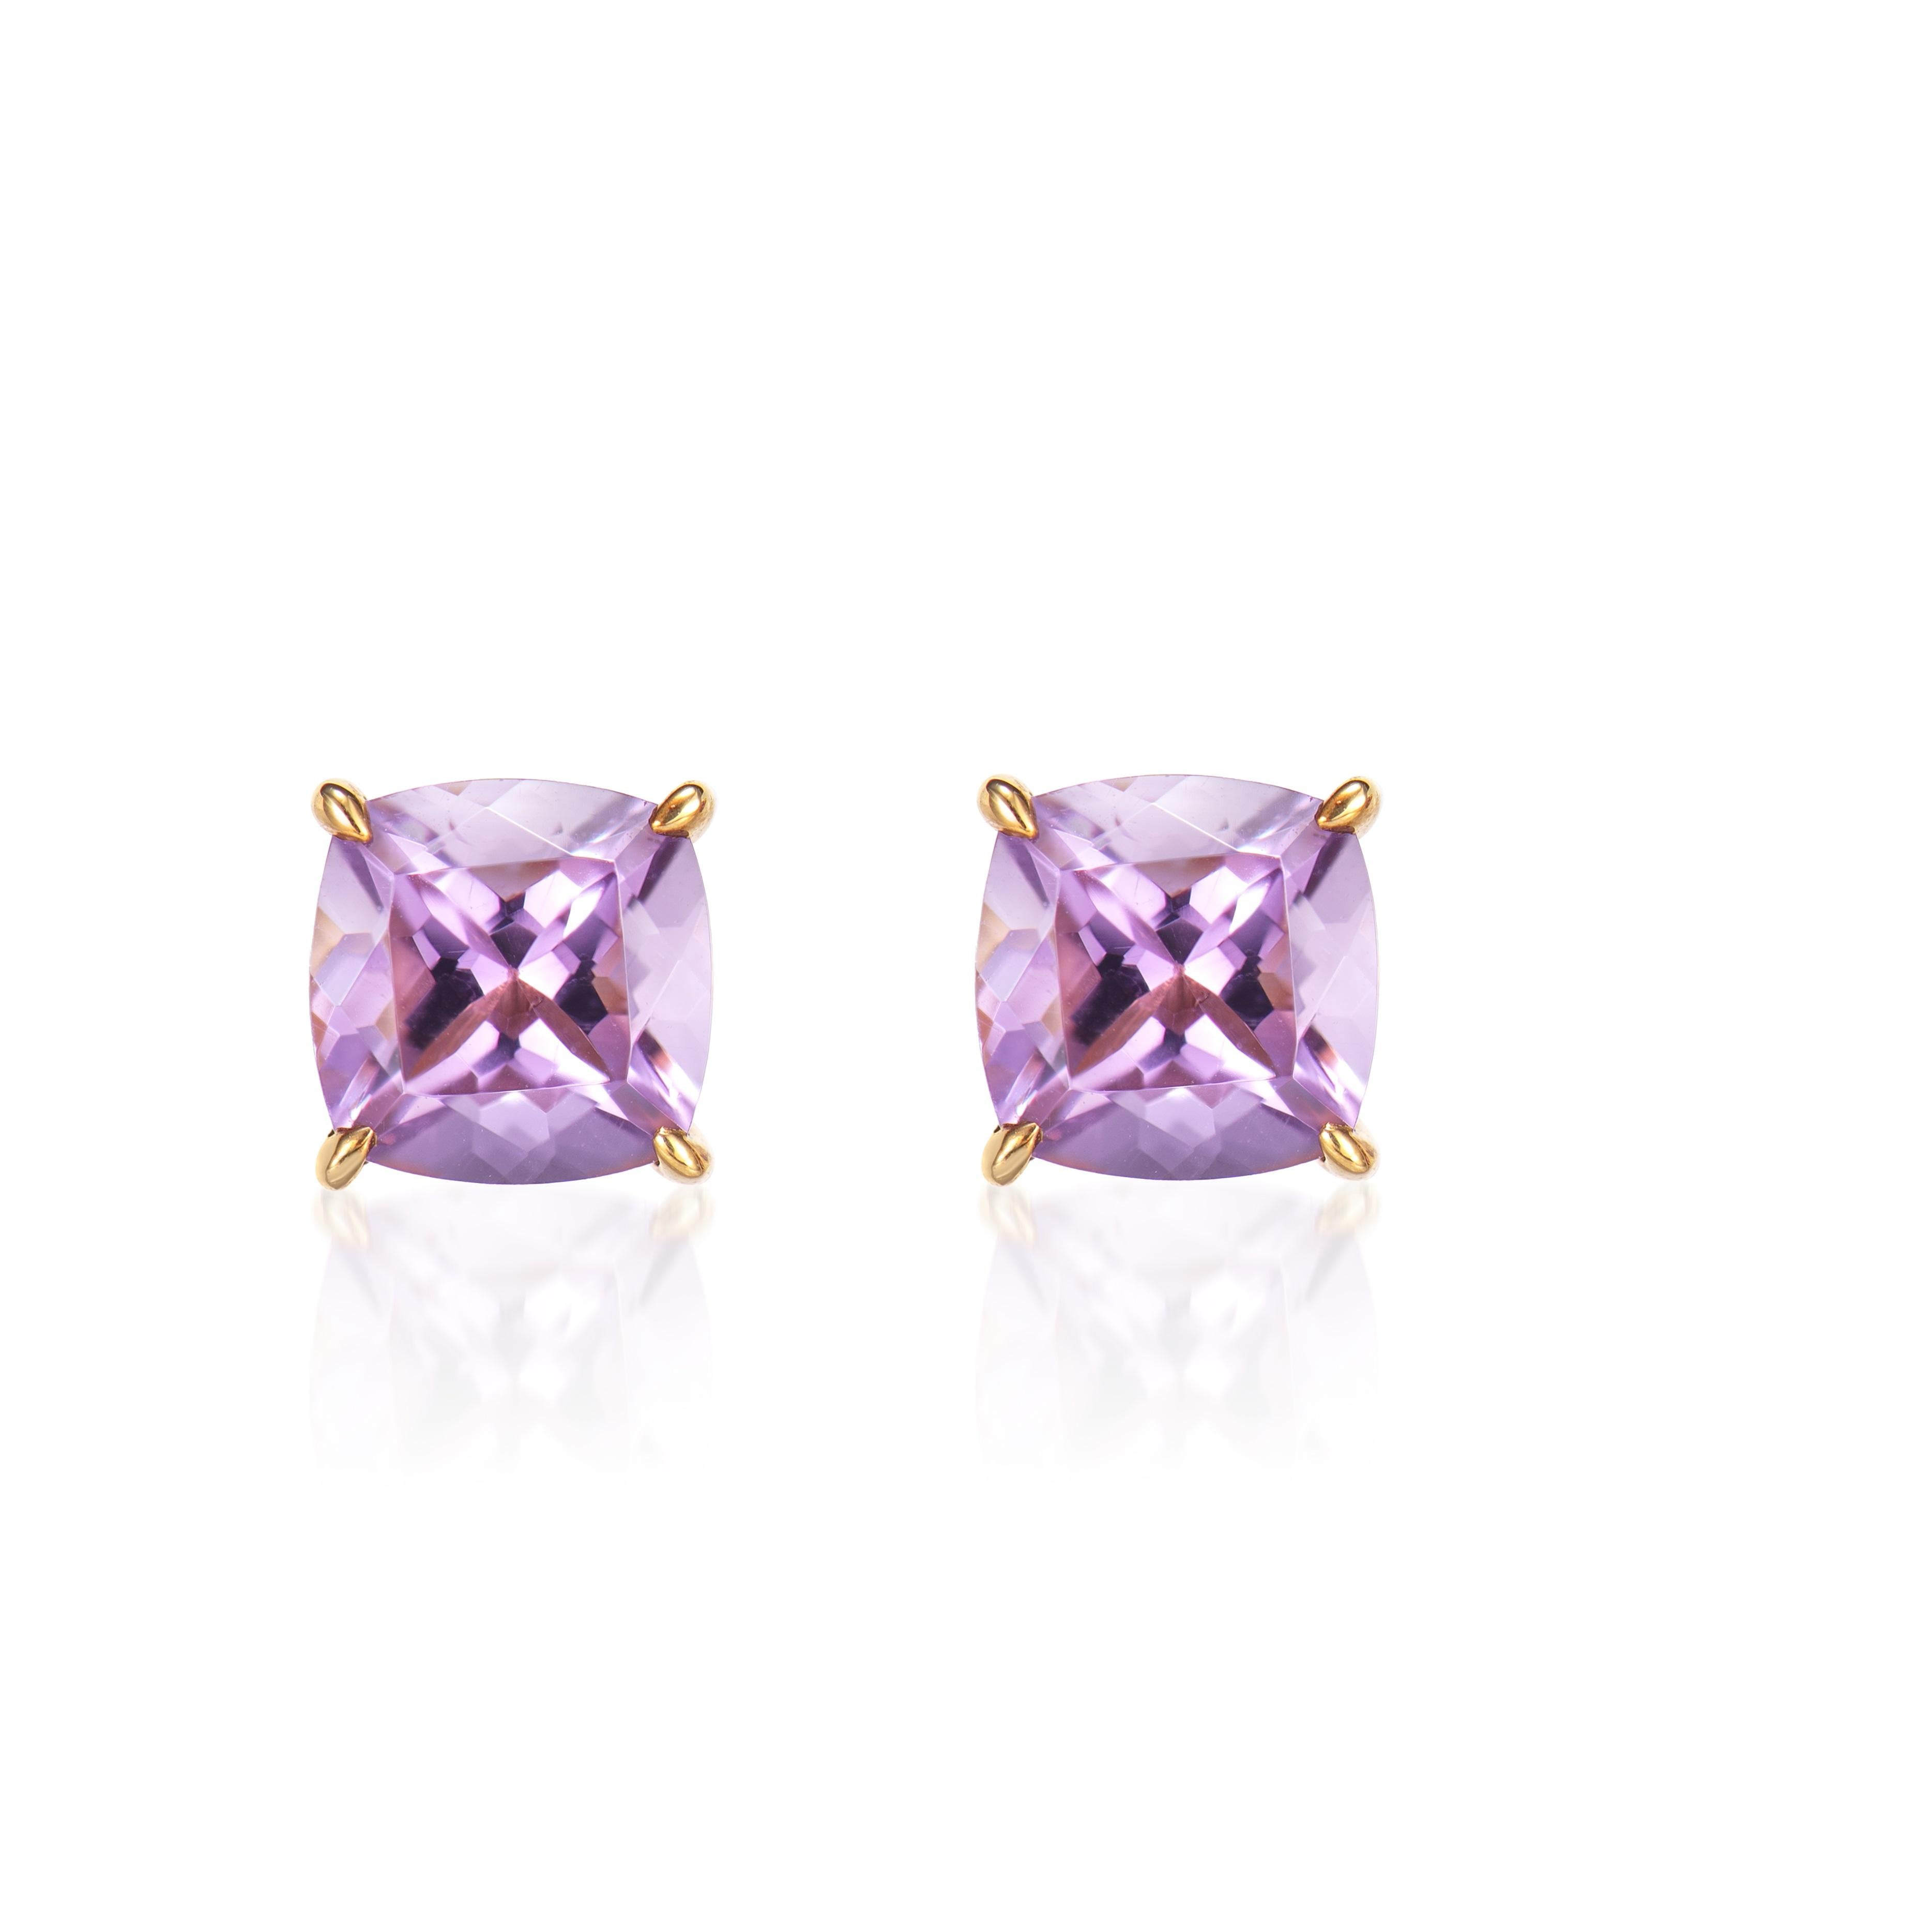 Contemporary 1.83 Carat Amethyst Stud Earring in 18Karat Yellow Gold. For Sale